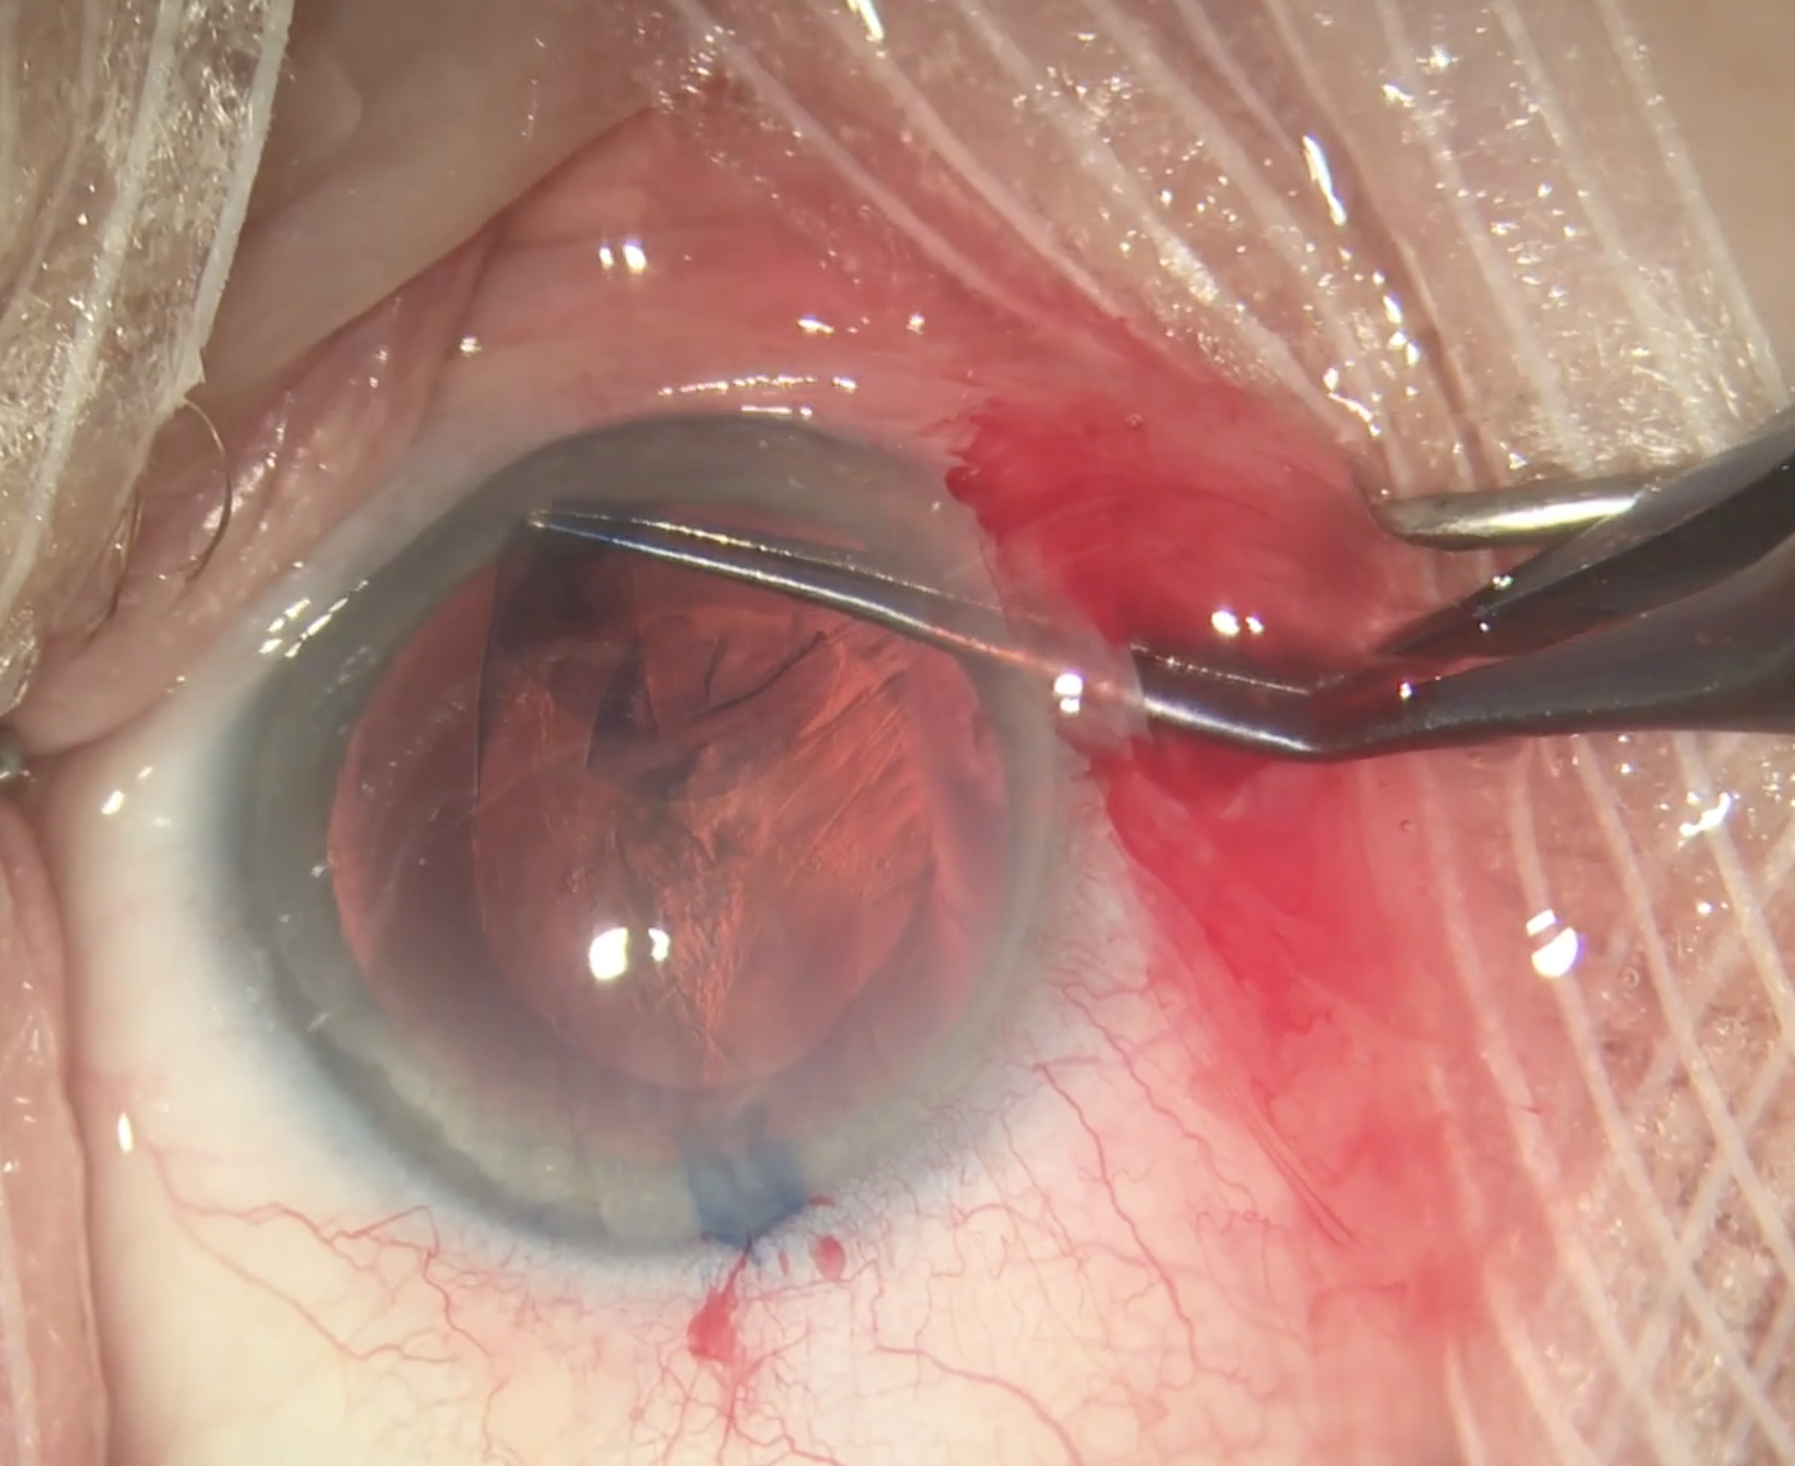 Post-cataract patients who experienced an elevated IOP in their first eye were 23.9% more likely to experience an IOP spike in their second eye. The authors of this paper presented at ARVO 2024 say physicians should consider this risk in patient care strategies.